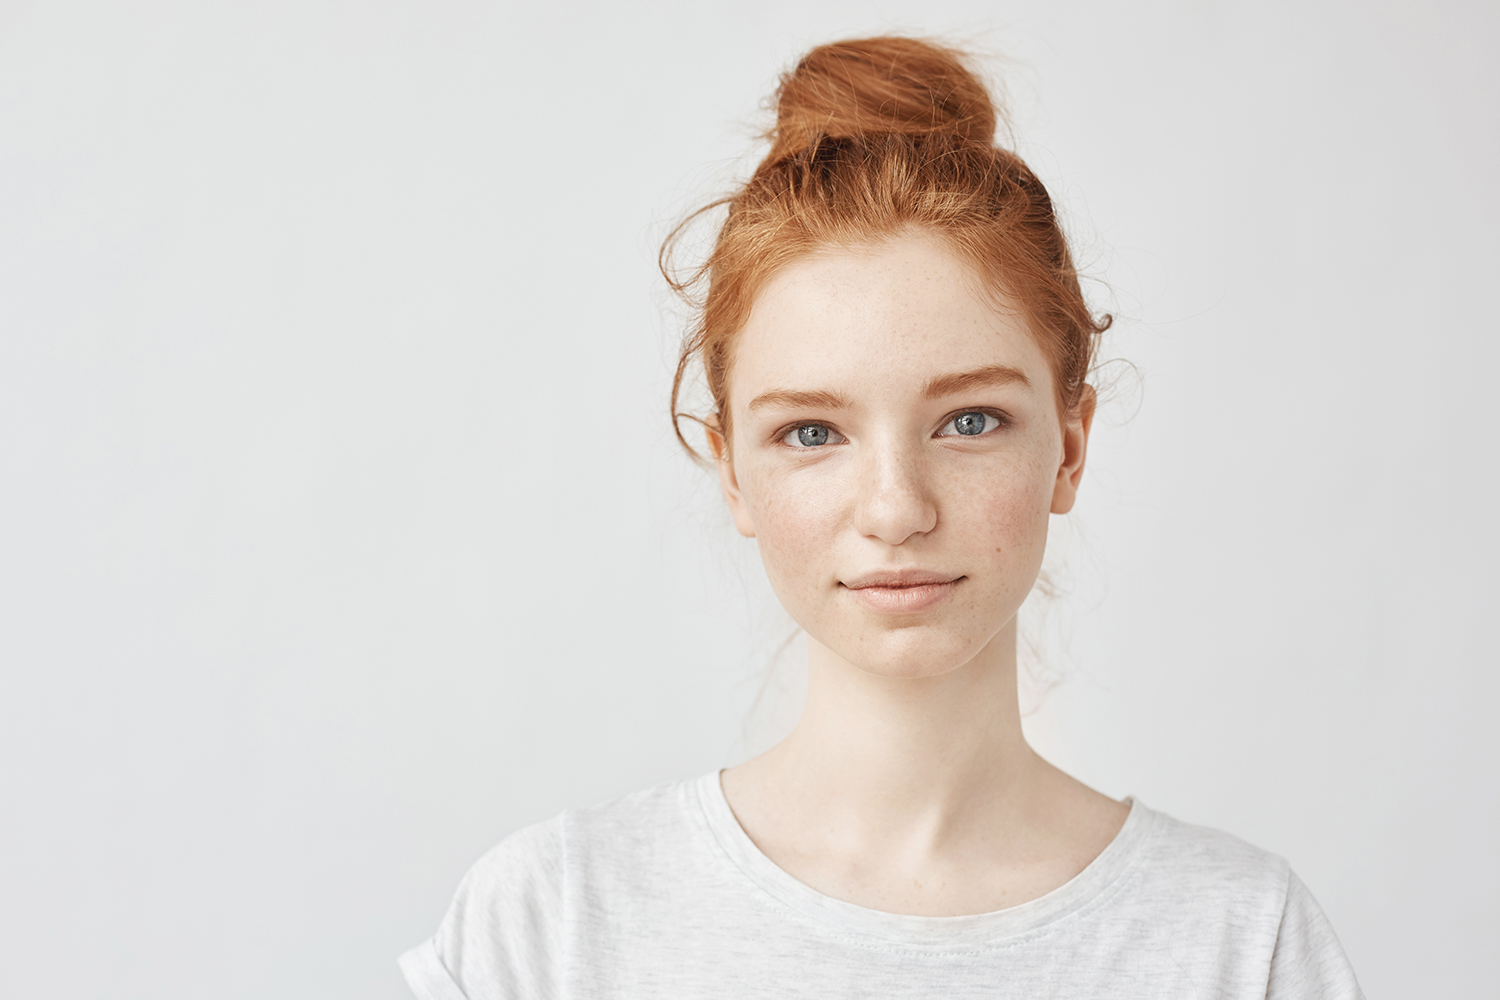 Portrait of young beautiful redhead girl smiling looking at camera. Copy space. Isolated on white background.